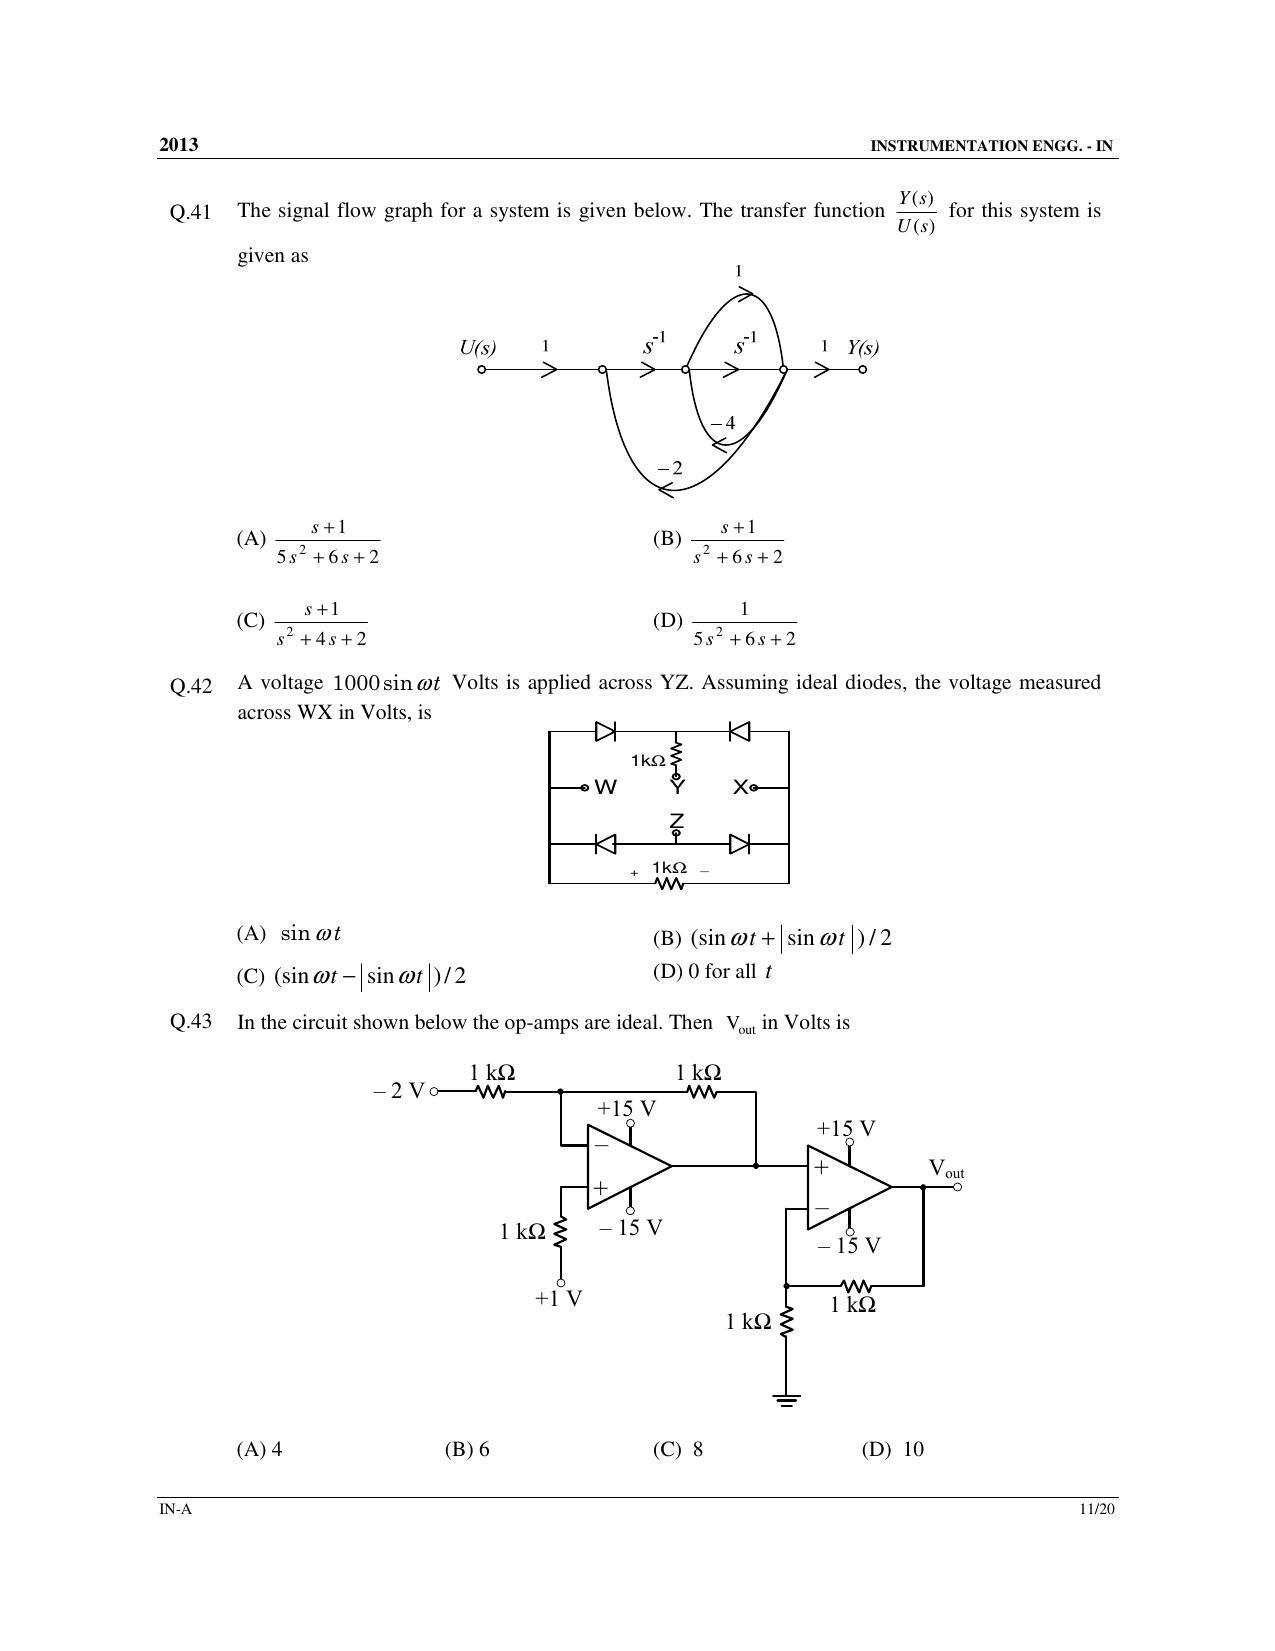 GATE 2013 Instrumentation Engineering (IN) Question Paper with Answer Key - Page 12